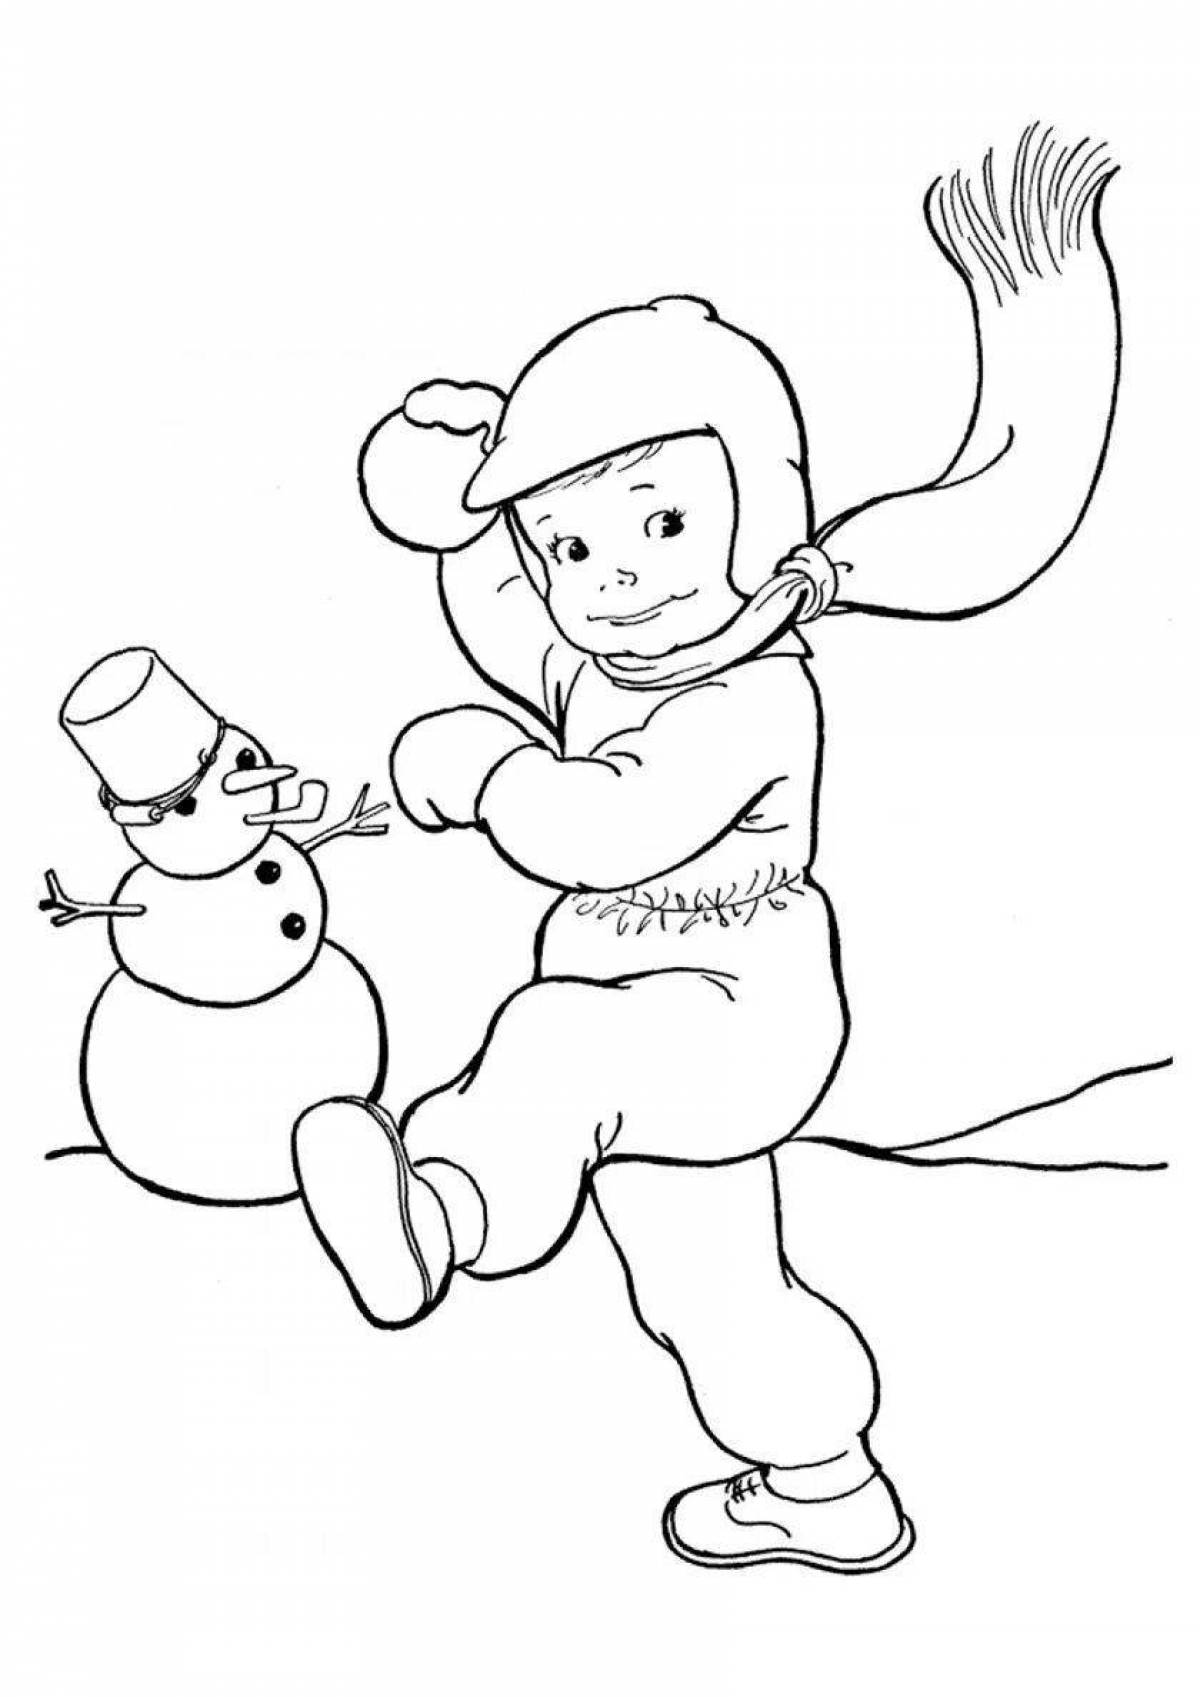 Colorful snowball game coloring page